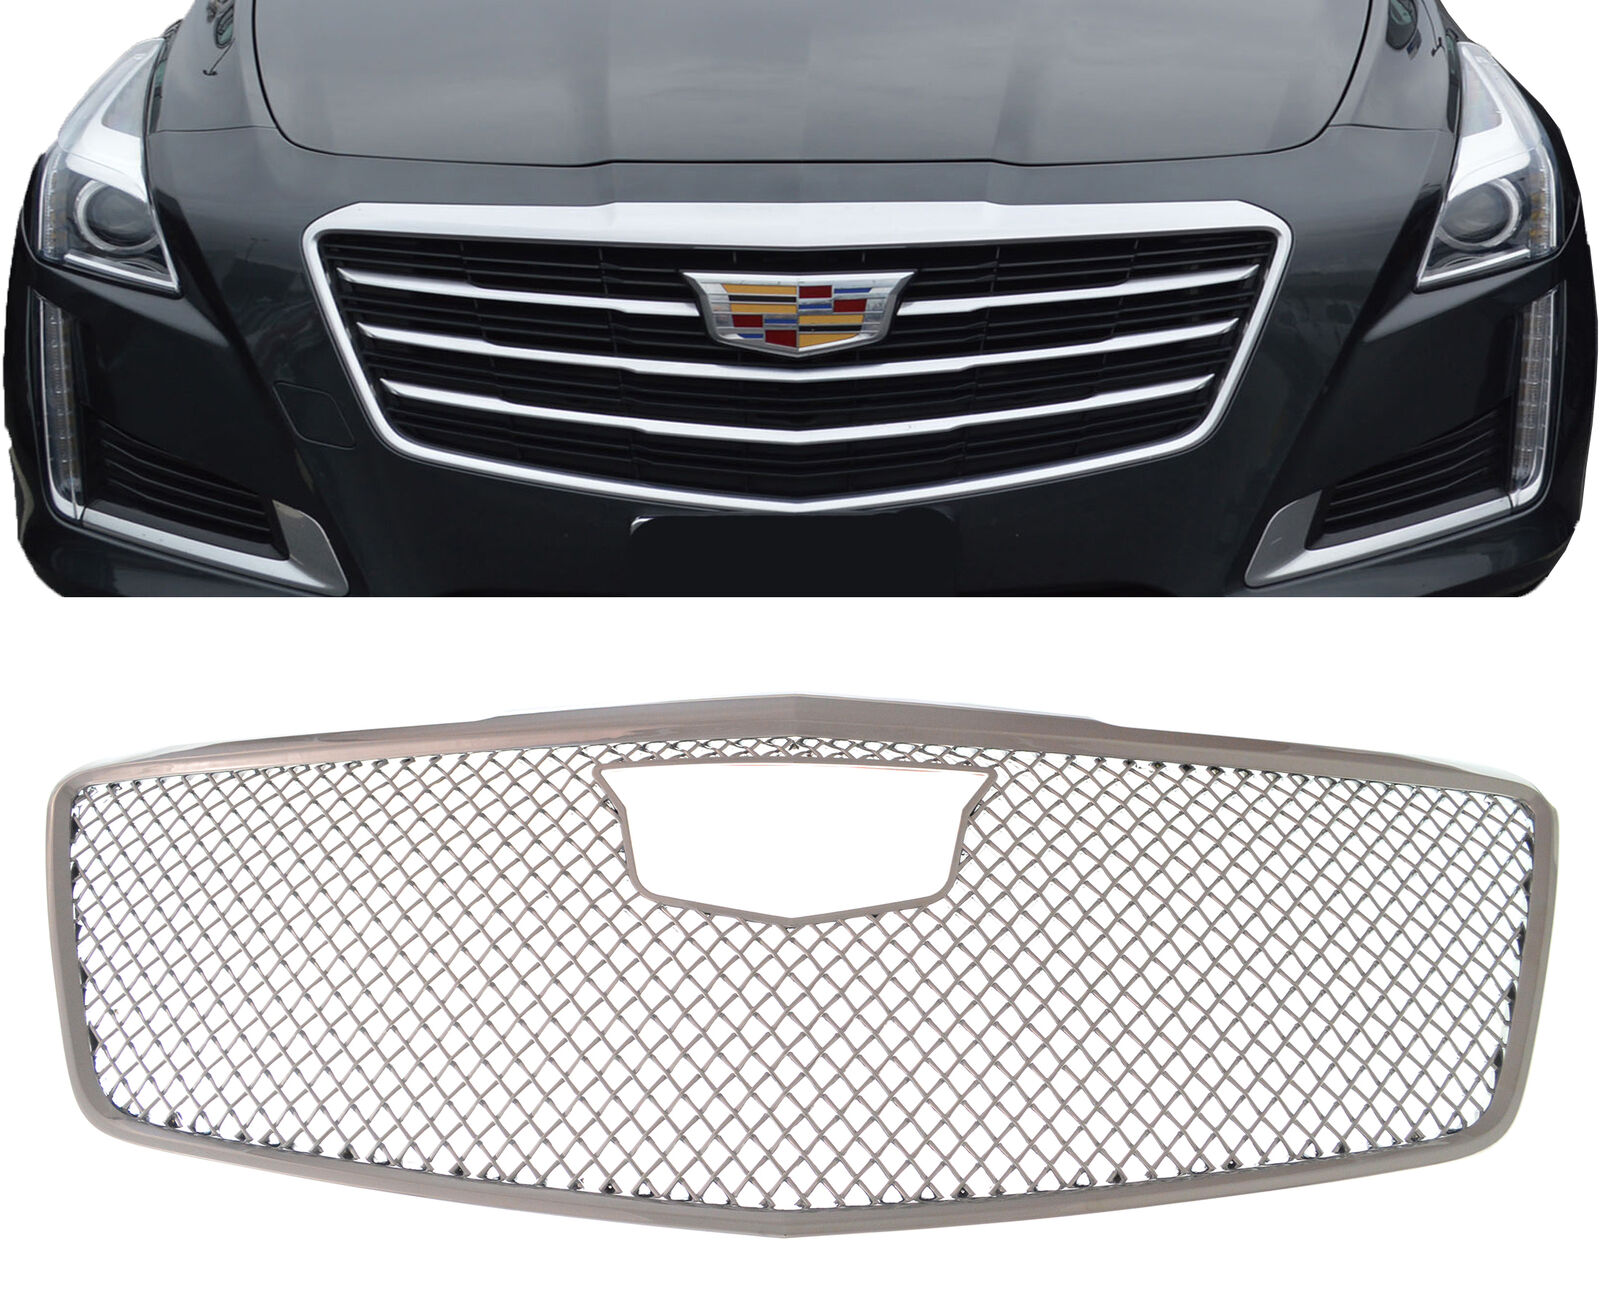 Patented Overlay Chrome Grille fits 15-19 Cadillac CTS (Not CTS-V)